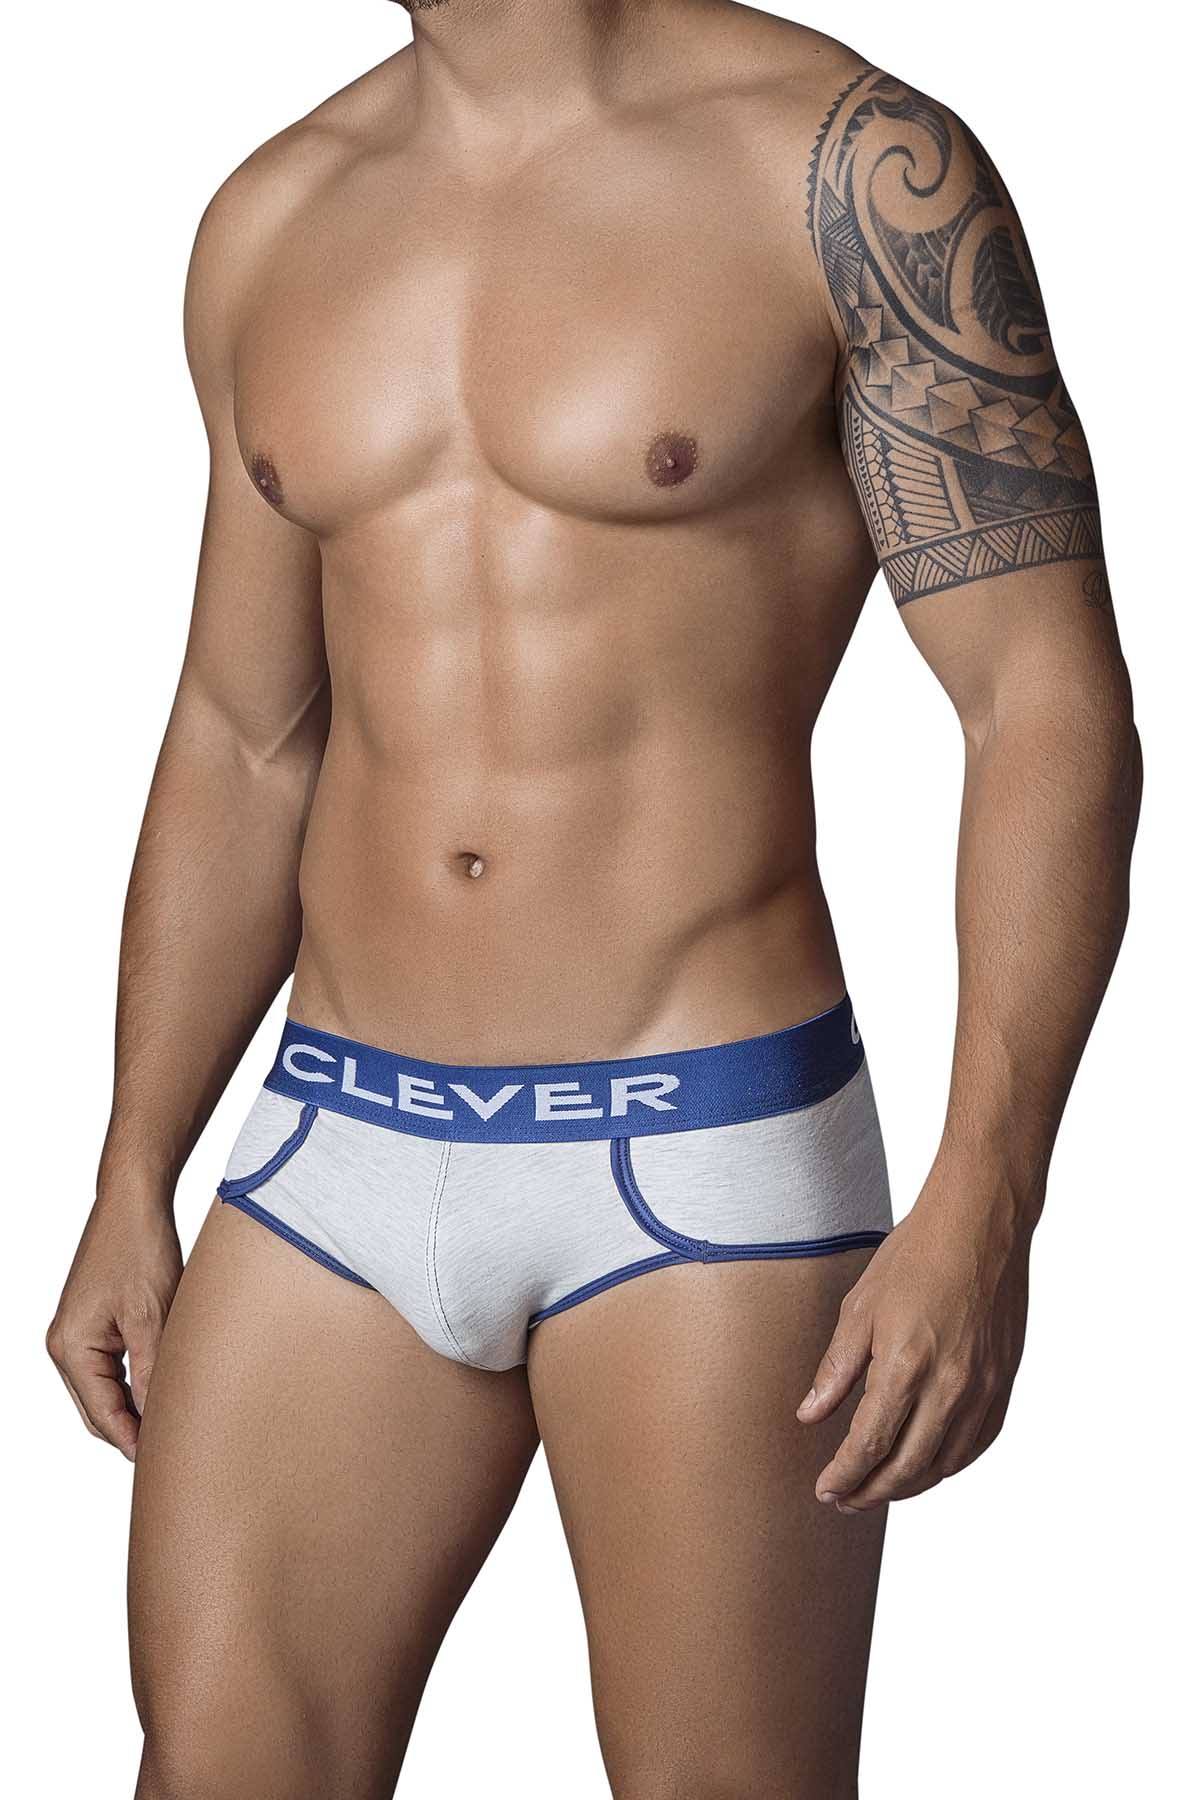 Clever Grey Roma Piping Brief